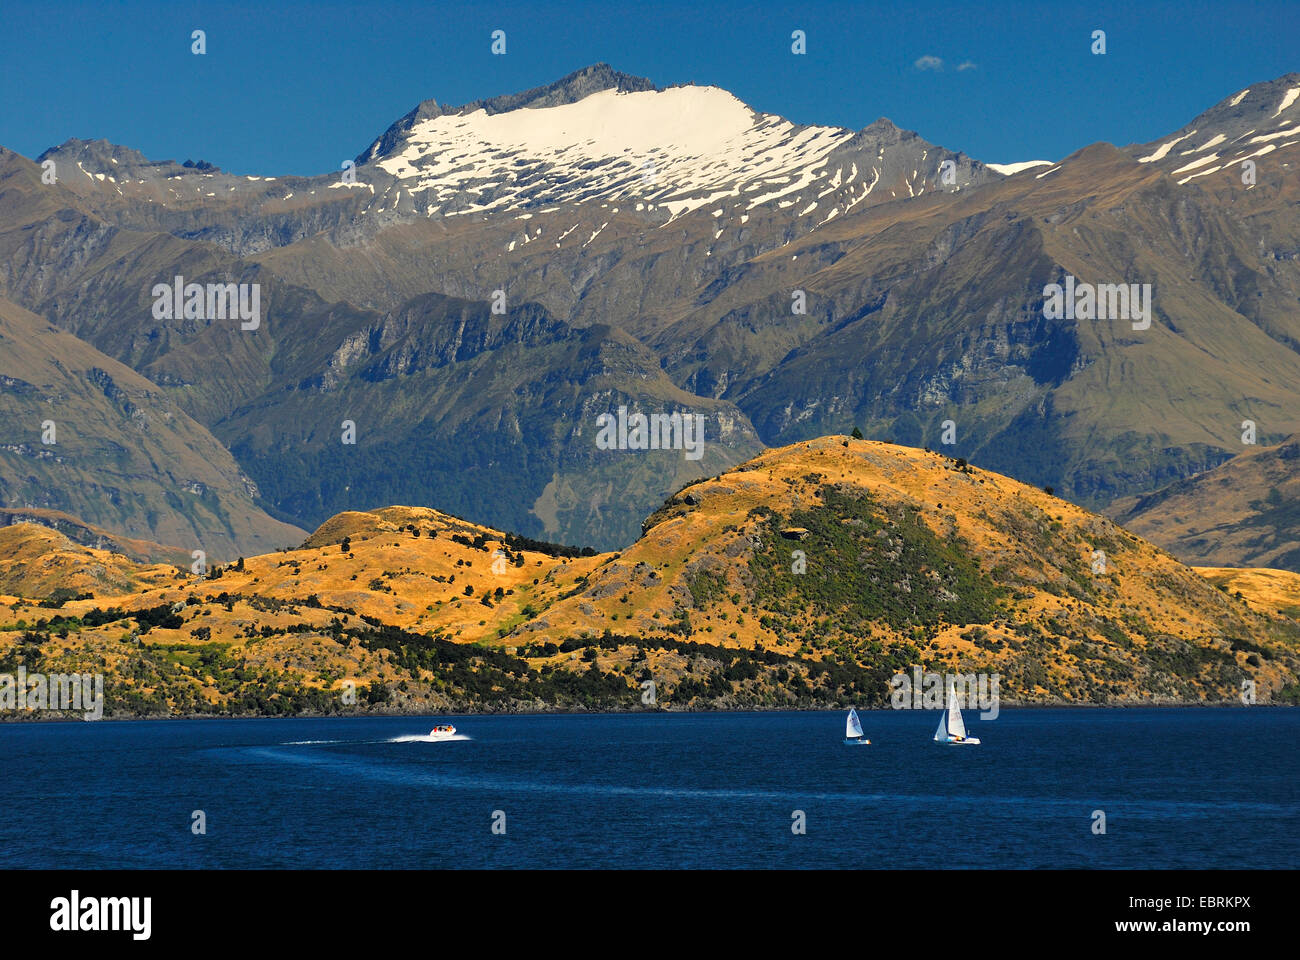 panoramic view over Lake Wanaka with mountains of the Southern Alps looming in the background, New Zealand, Southern Island, Otago Stock Photo